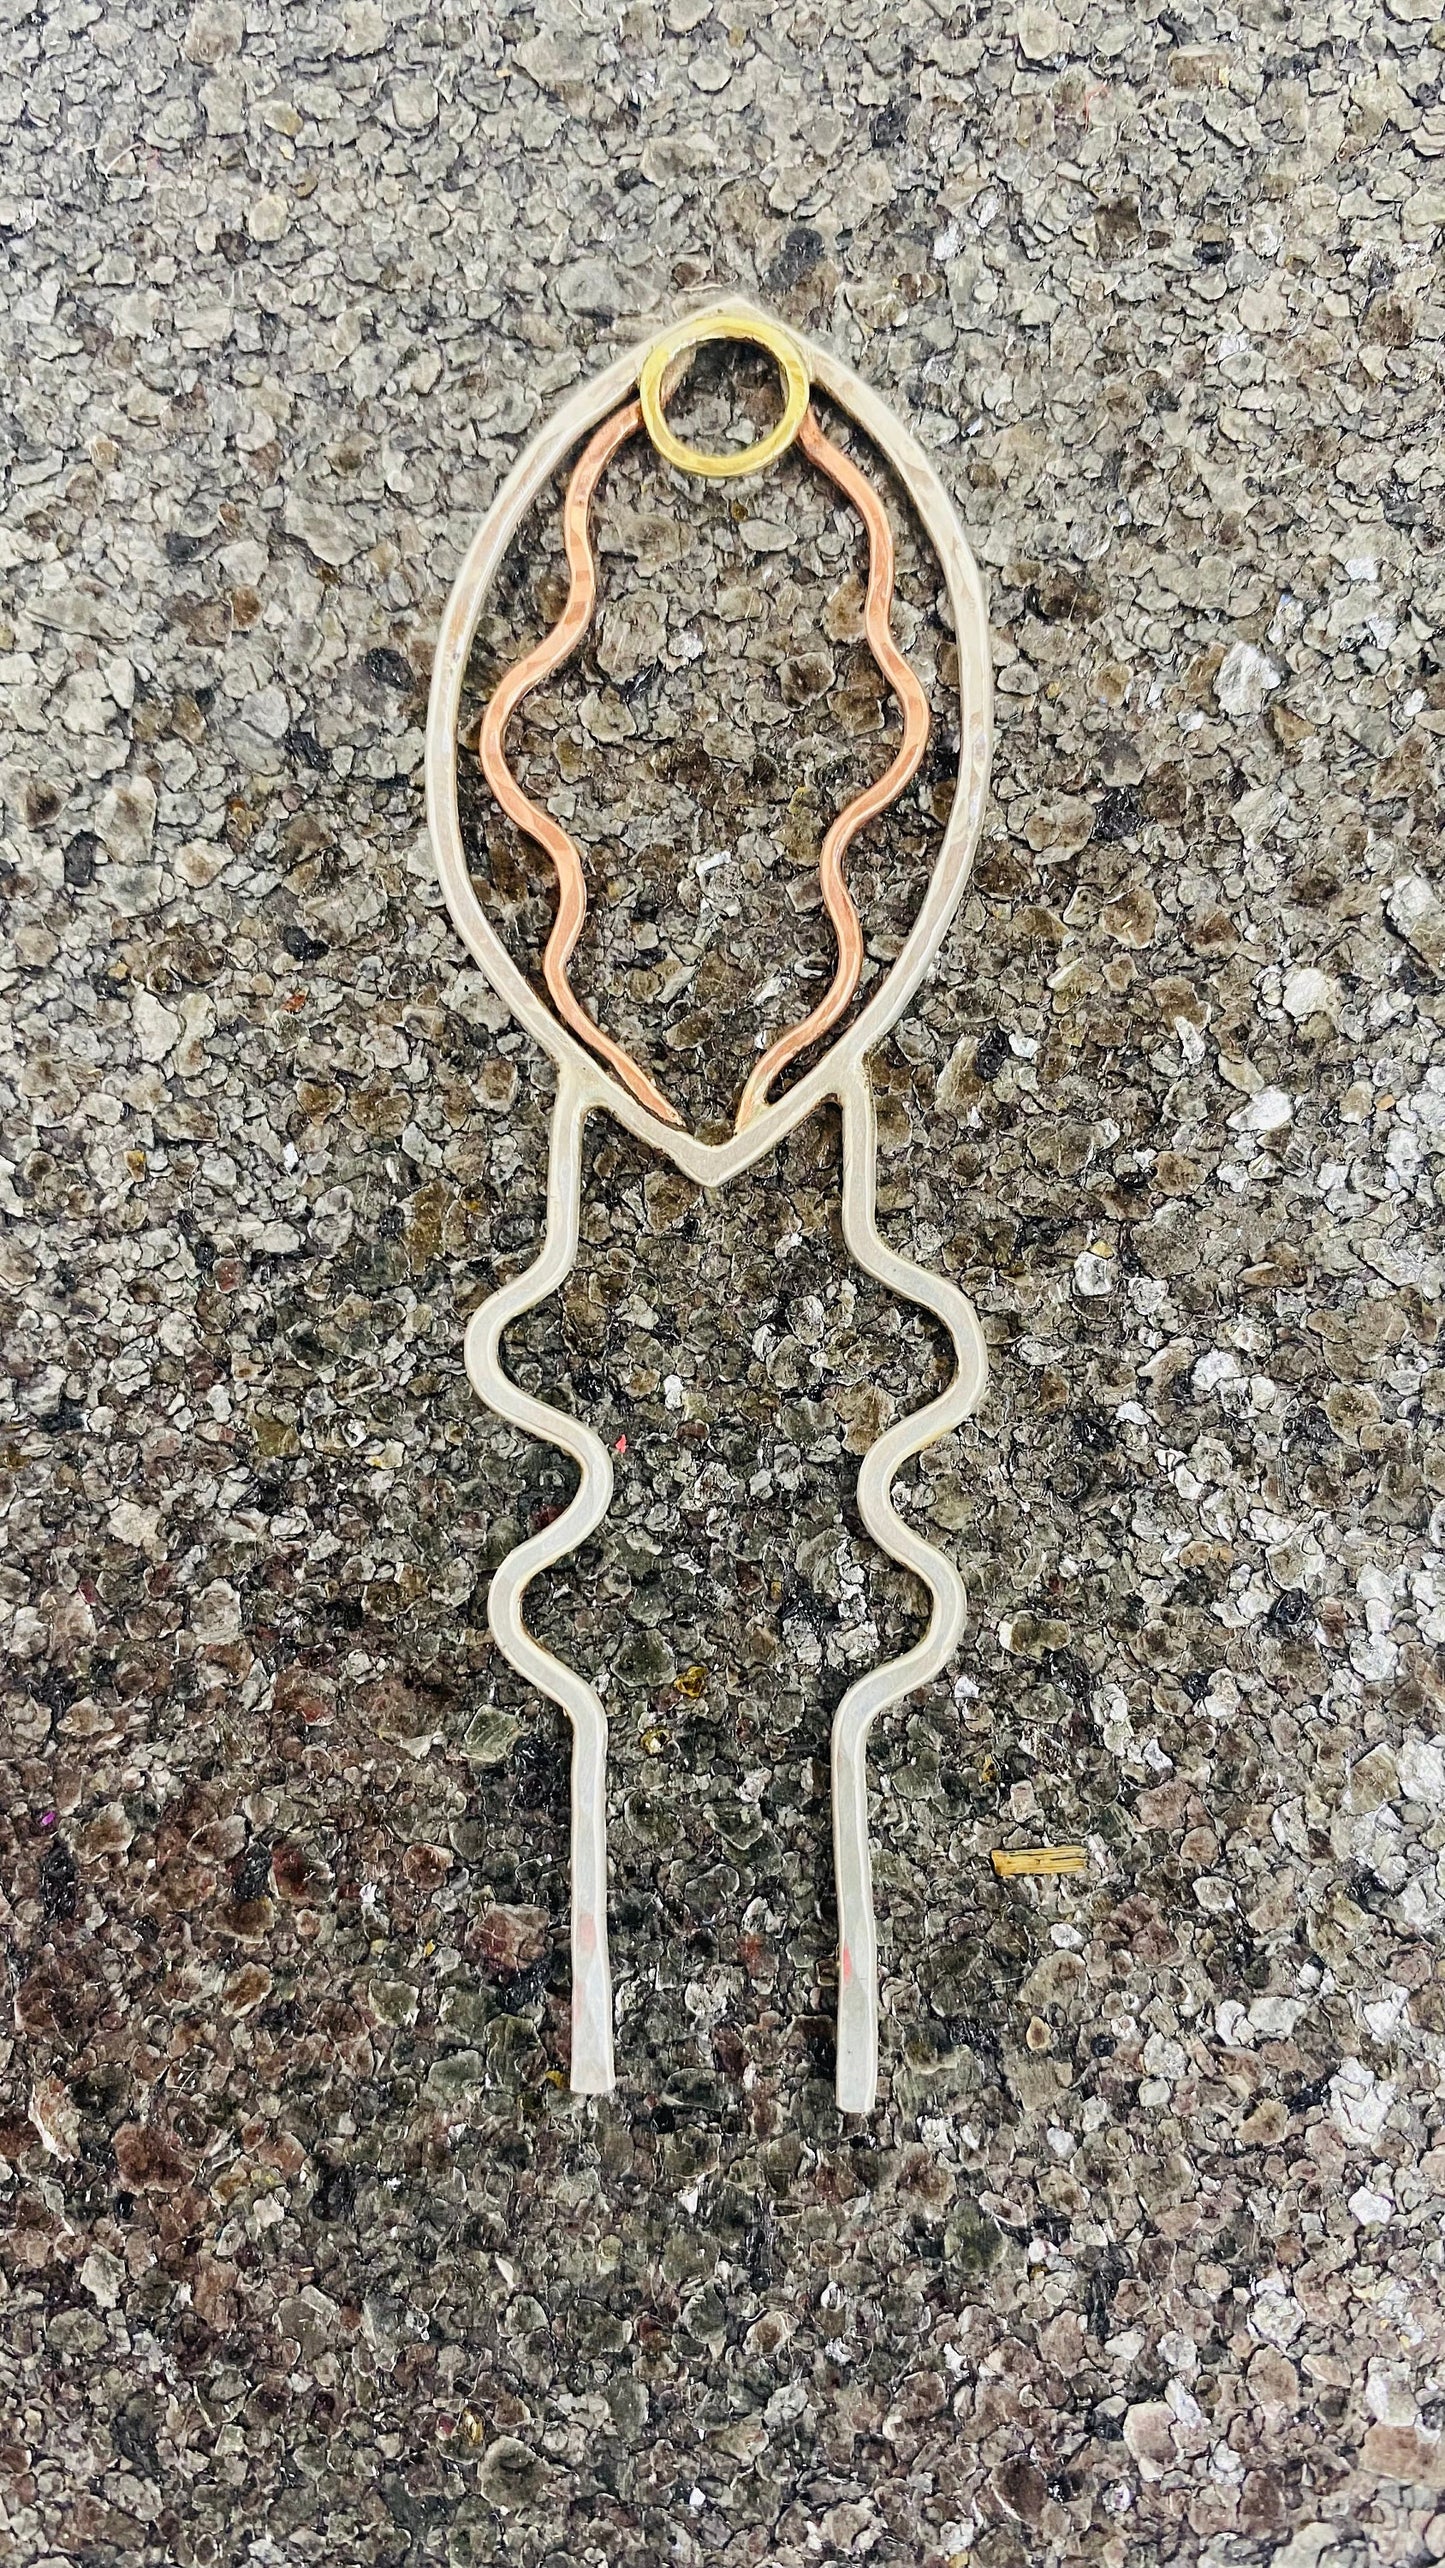 Sterling Vulva Hairpin -Sterling Vulva Jewelry - Sterling Hair Prong - Feminist Jewelry - Clitoris Jewelry - Sterling Hair Stick